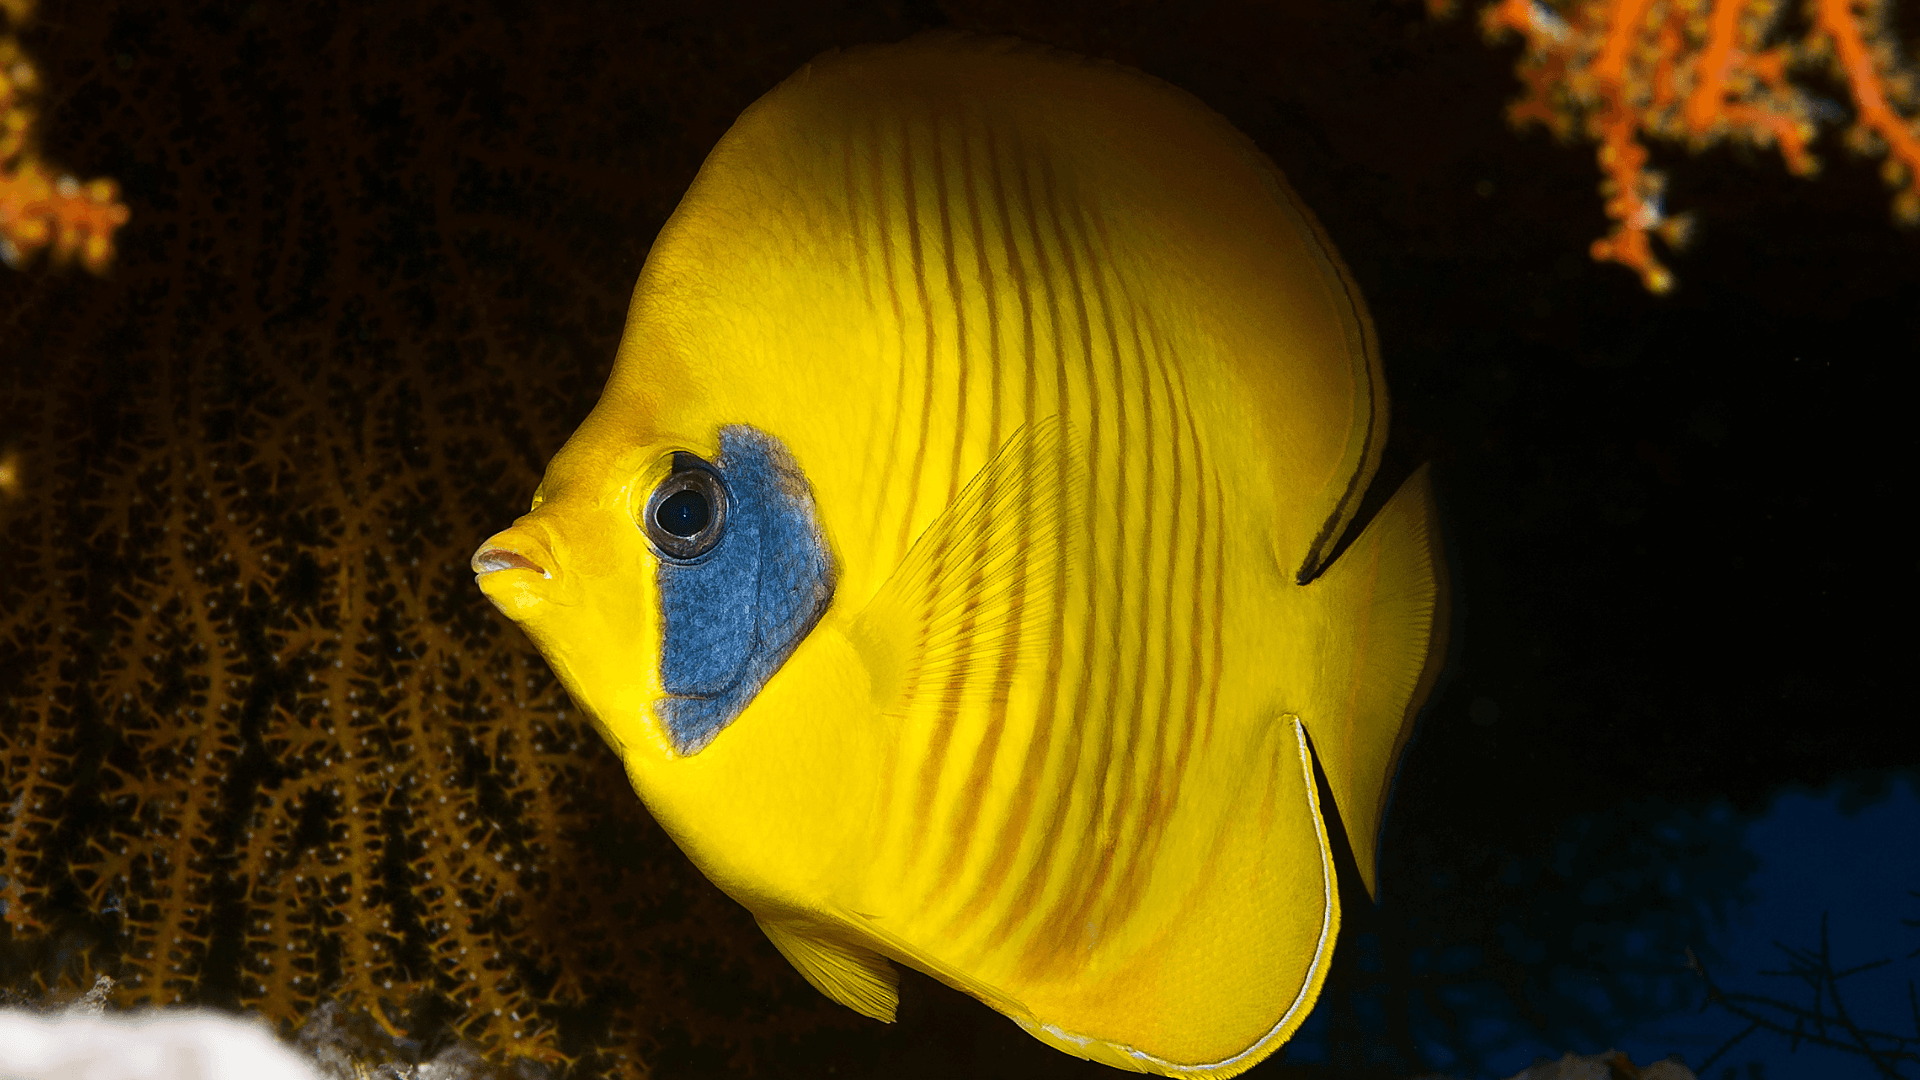 A photo of Masked butterflyfish